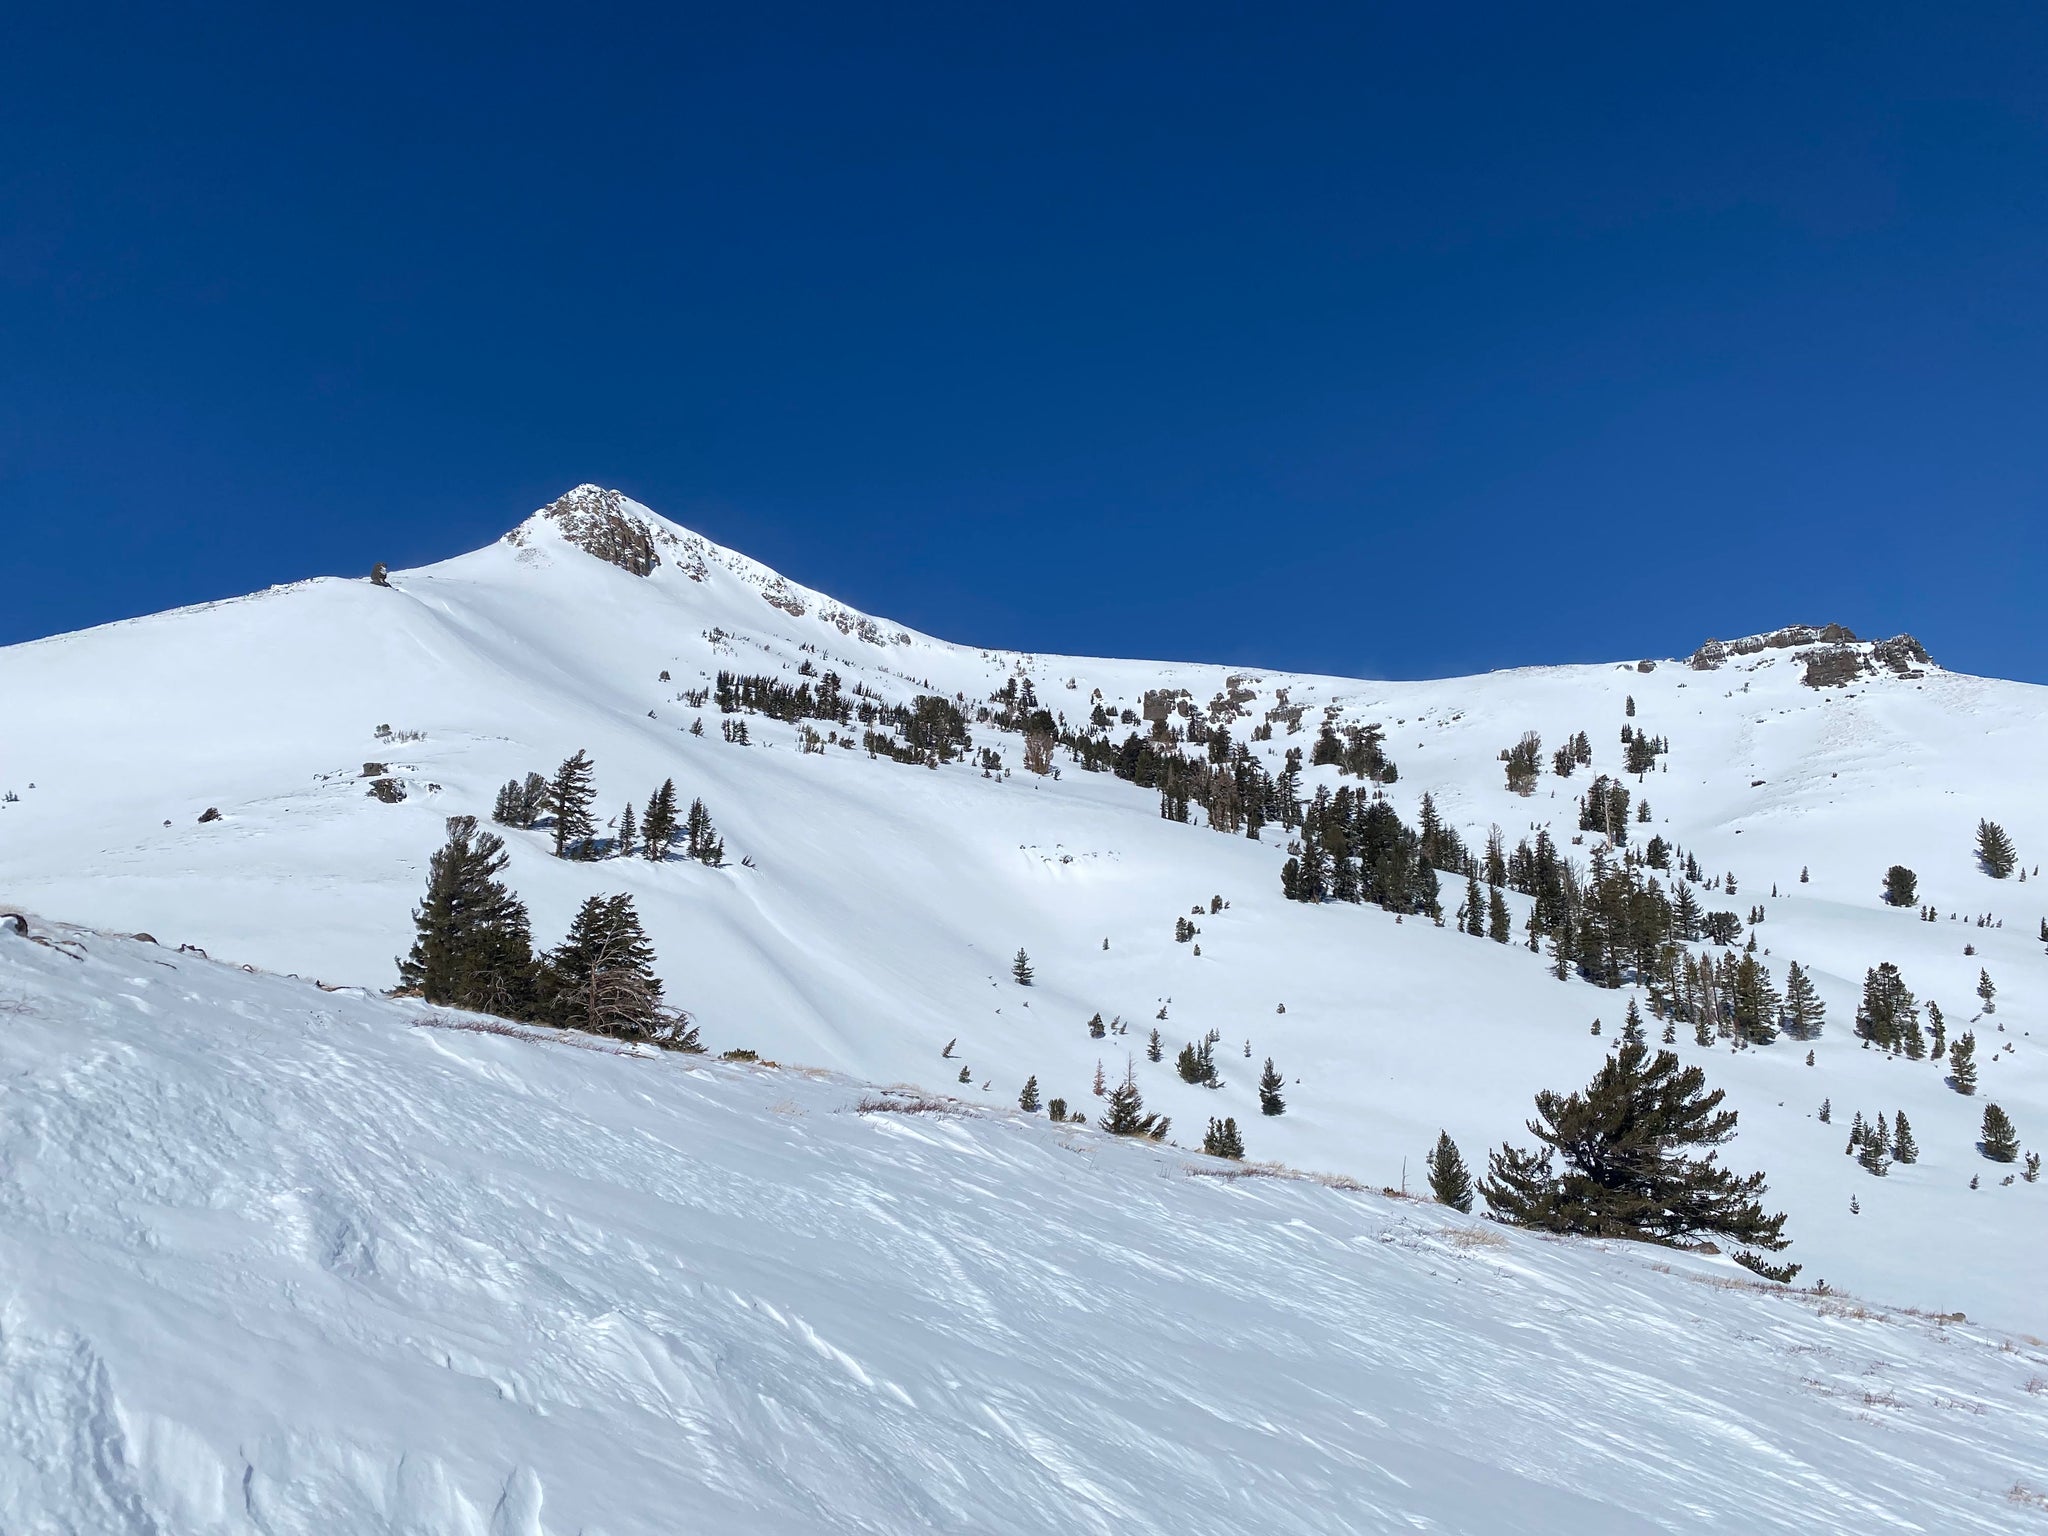 South Lake Tahoe Backcountry Conditions on Stevens Peak in Carson Pass